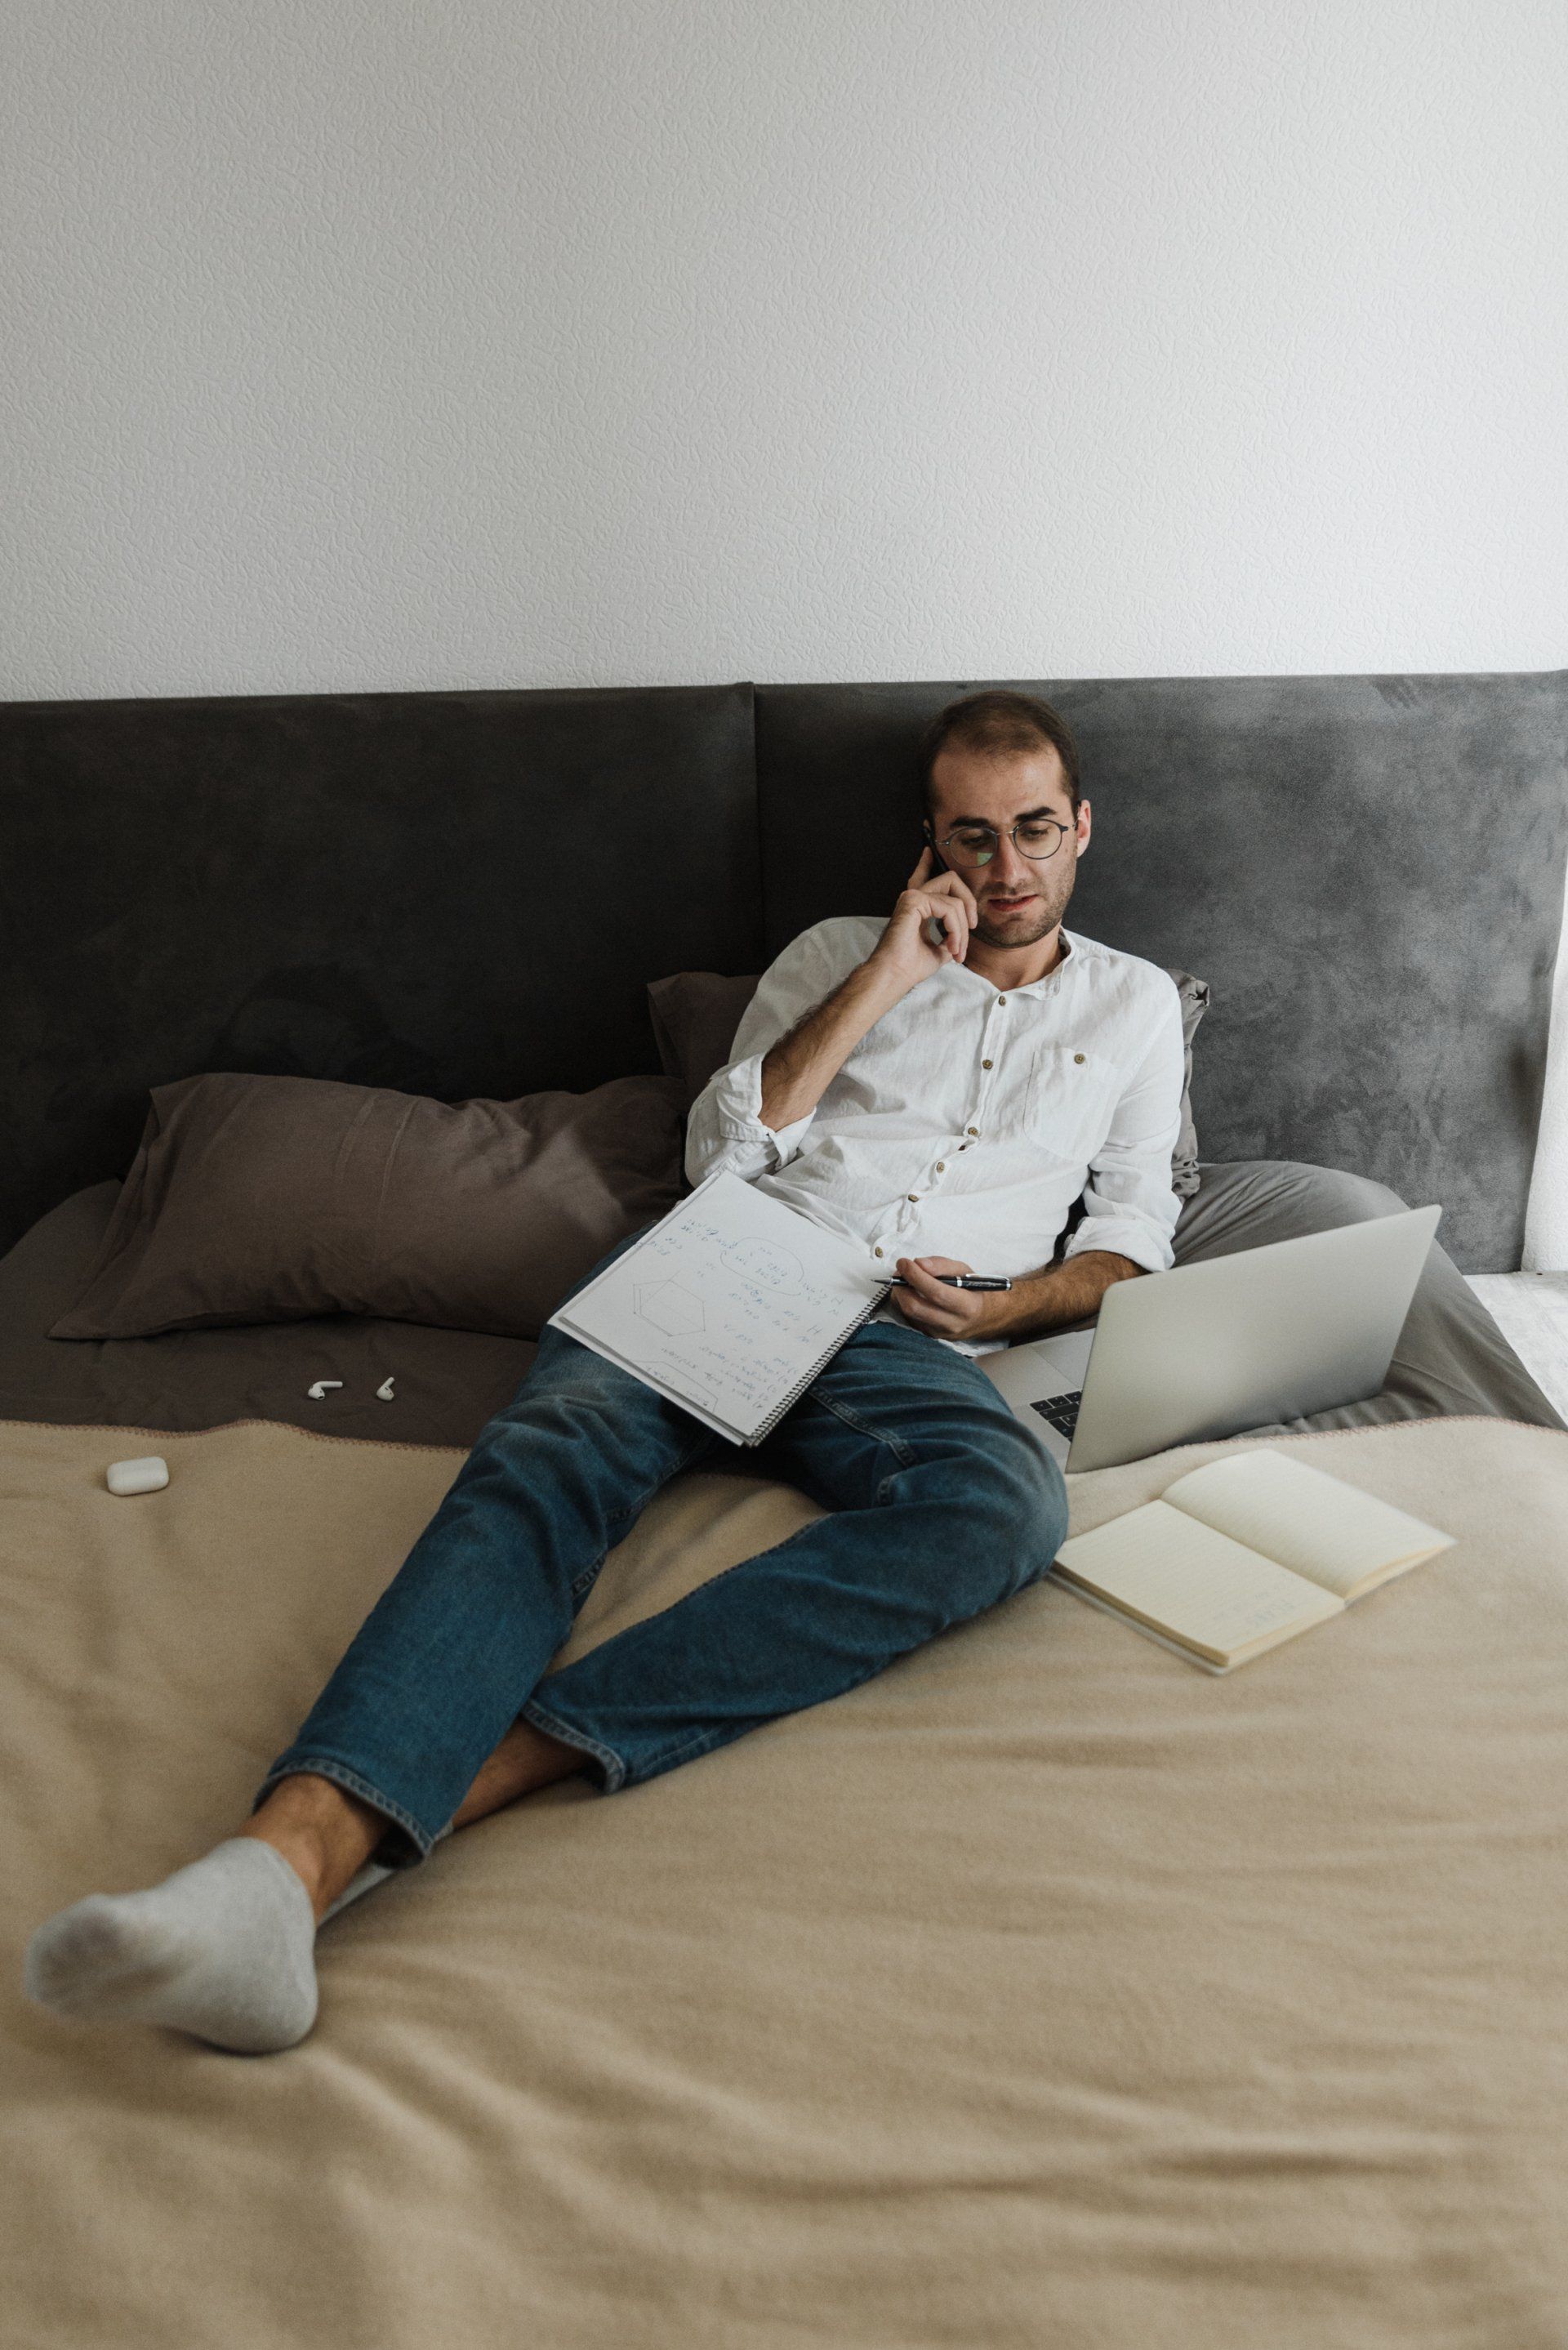 Man lounging on bed with papers and laptop around him